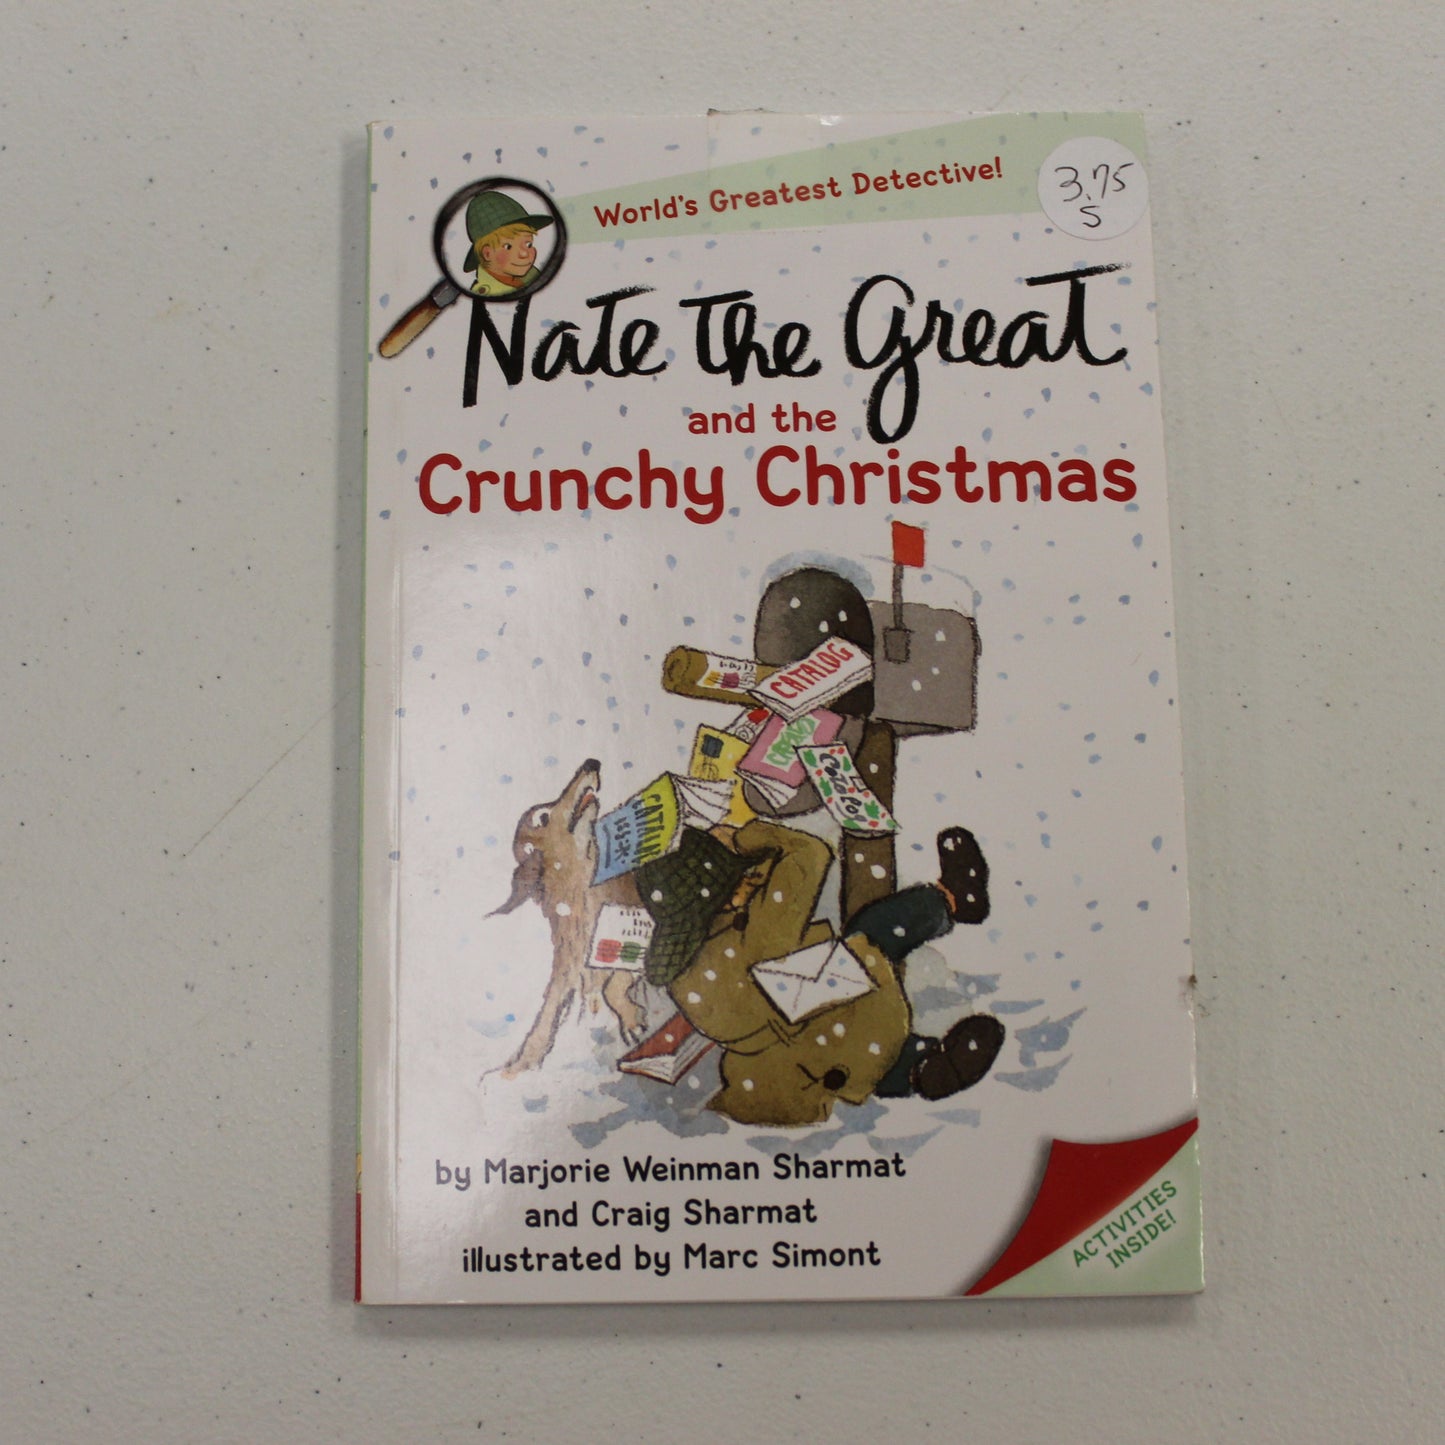 NATE THE GREAT AND THE CRUNCHY CHRISTMAS